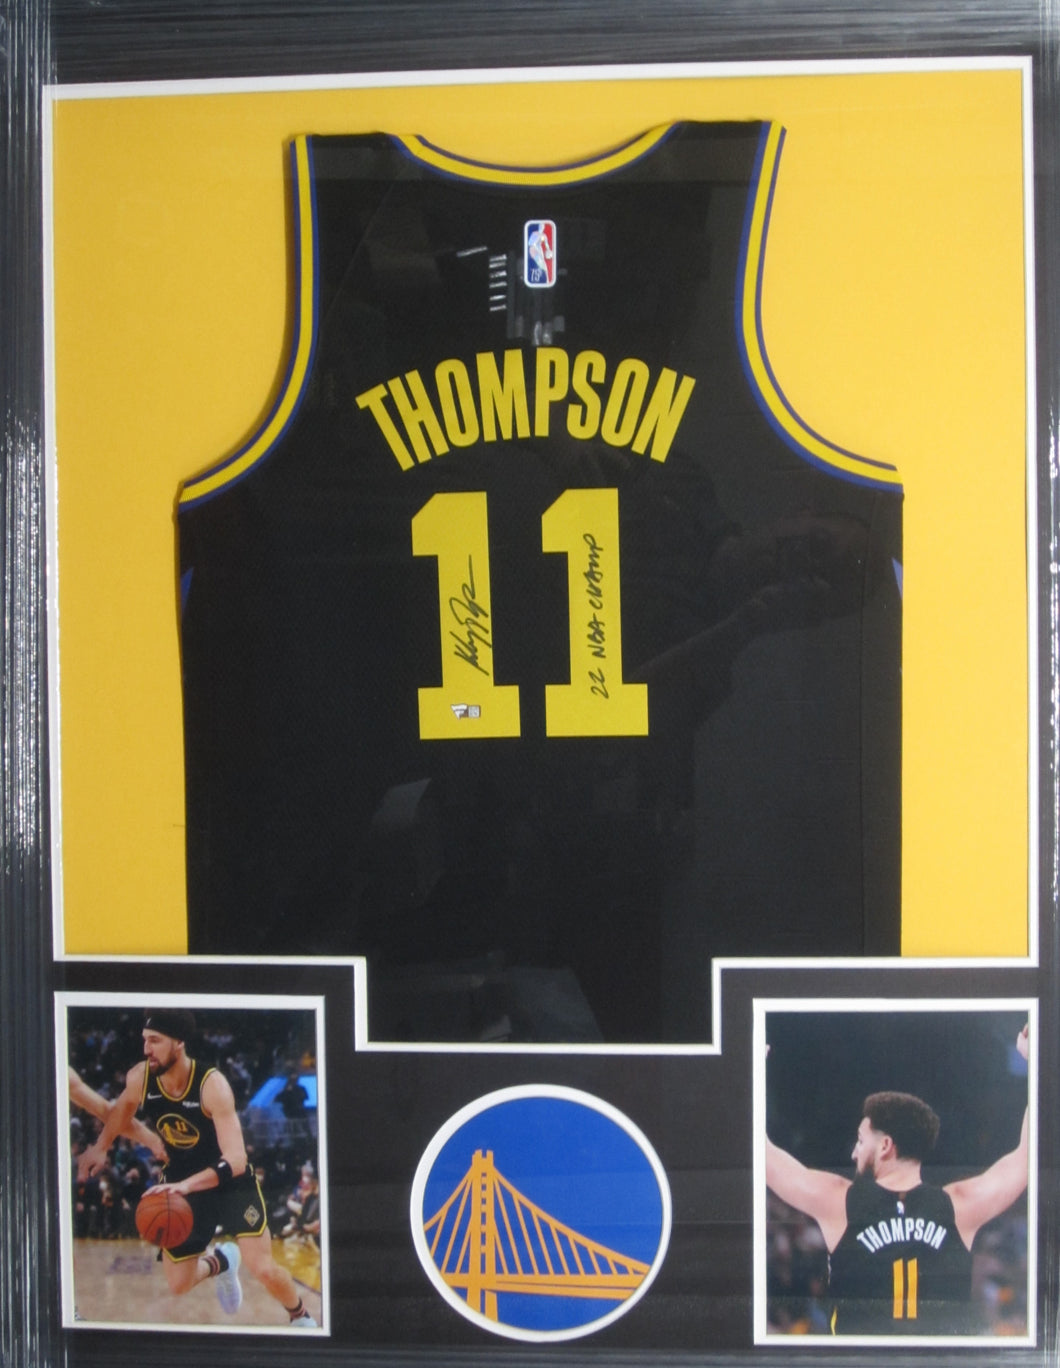 Golden State Warriors Klay Thompson Signed Jersey with 22 NBA CHAMP Inscription Framed & Matted with FANATICS Authentic COA